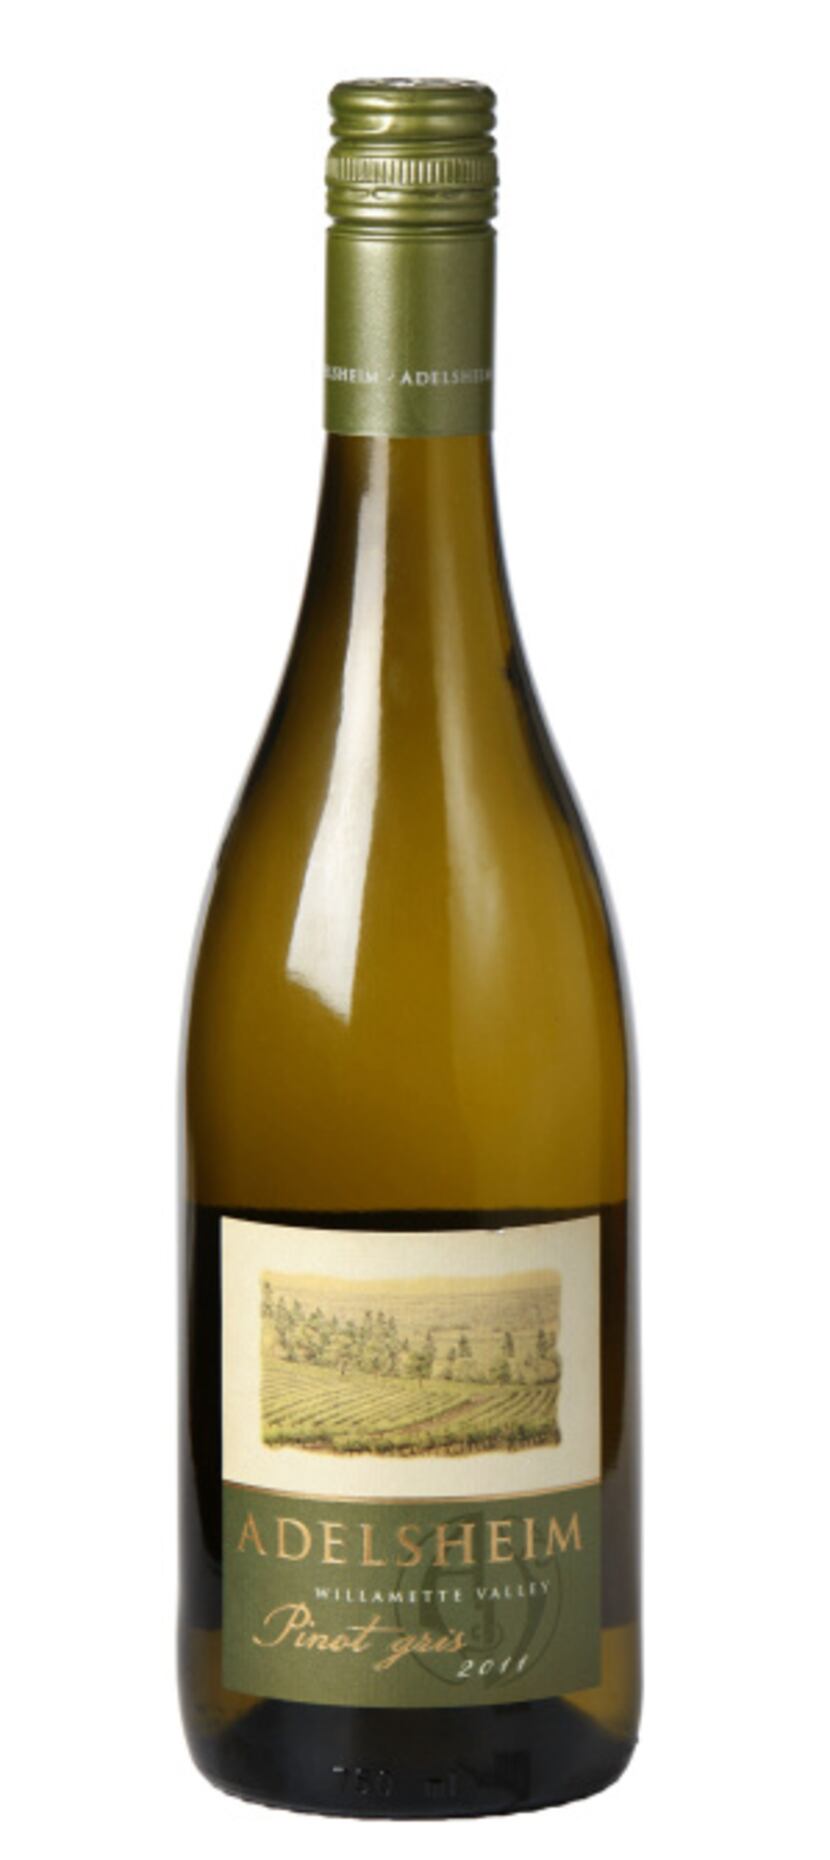 Adelsheim Pinot Gris 2011, Oregon. $17.25 to $19.99; PK’s Wine and Spirits, Spec’s, Central...